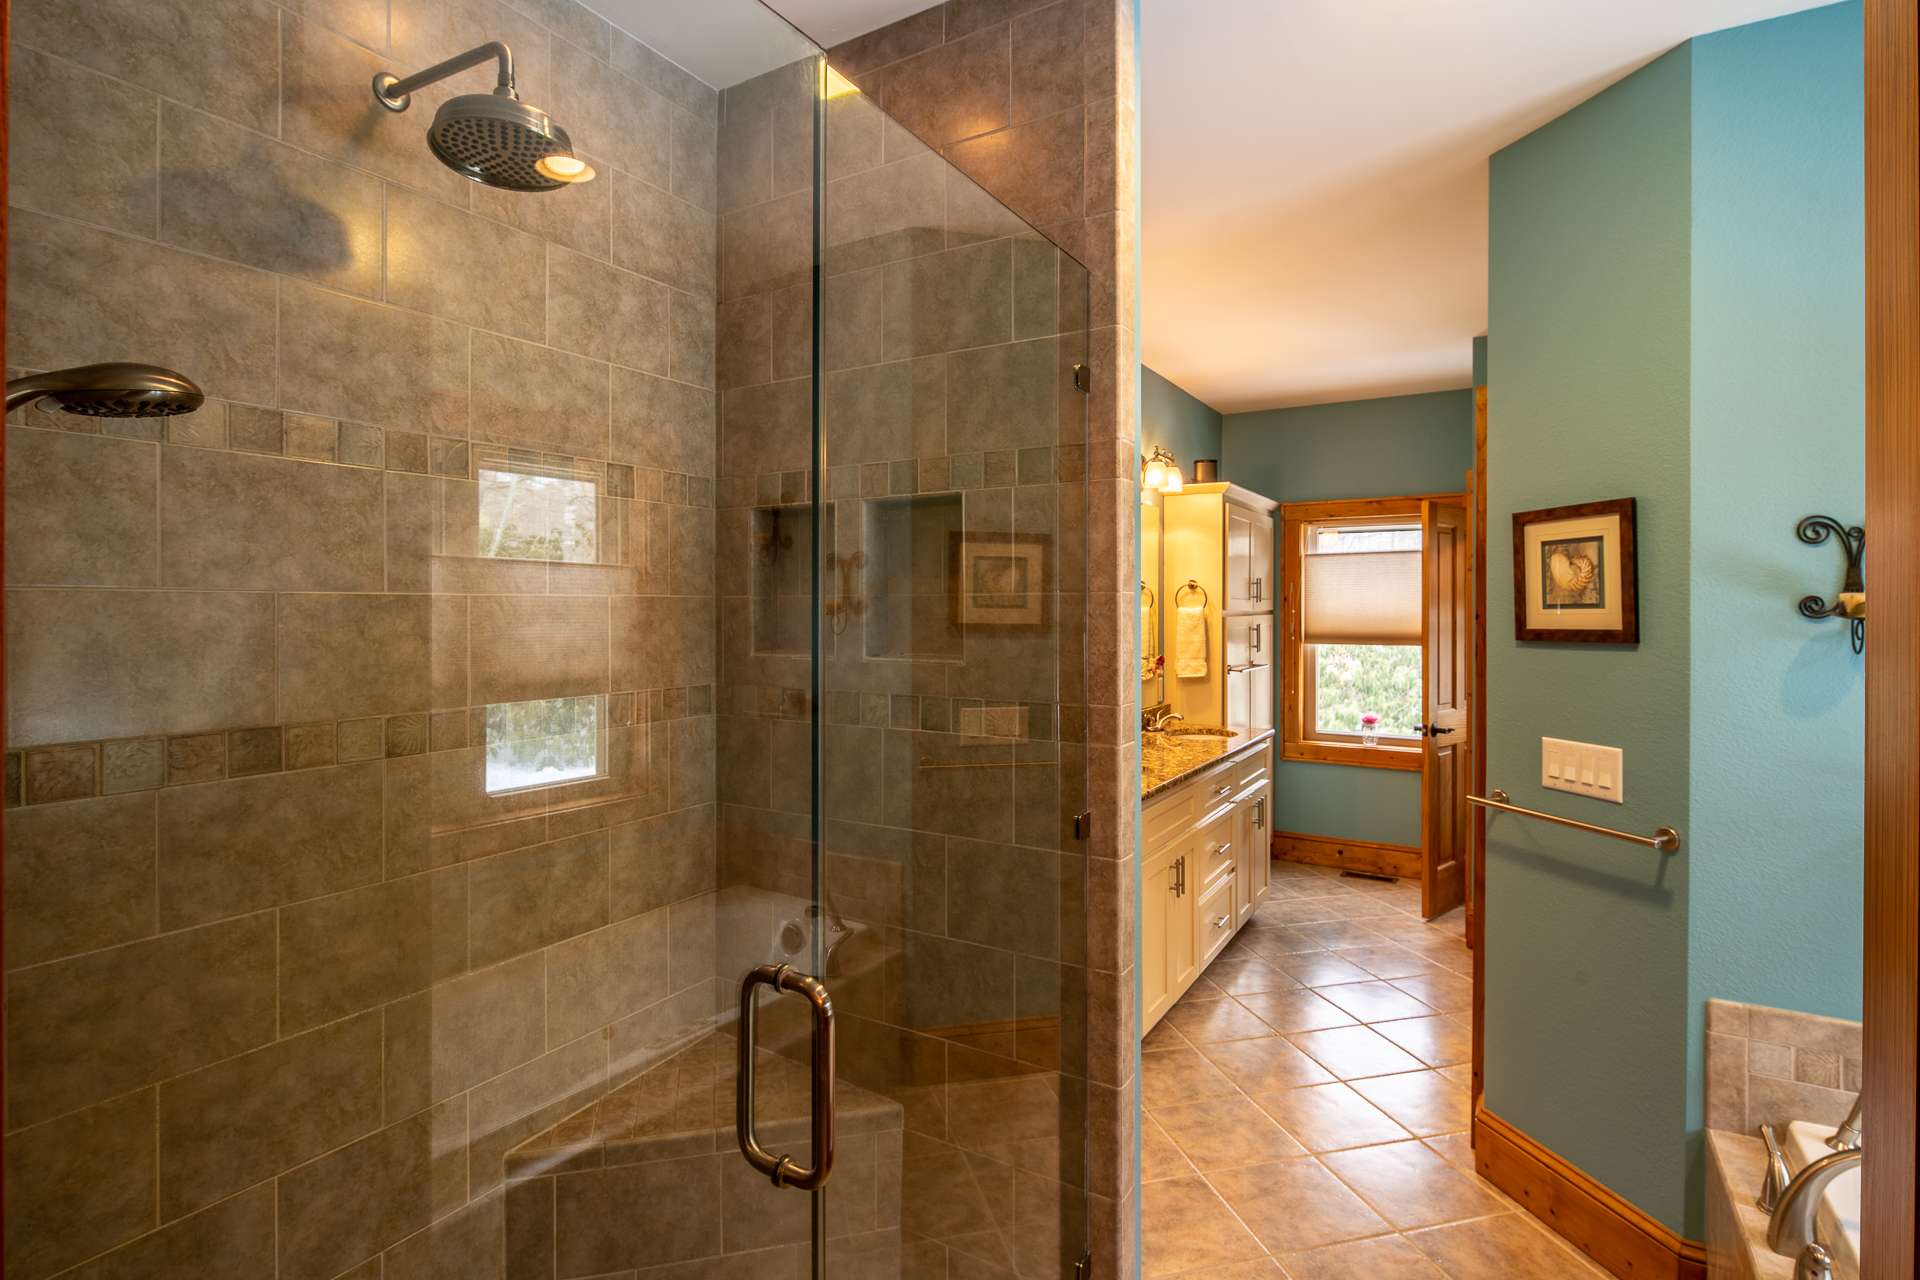 Large walk-in tile shower and…